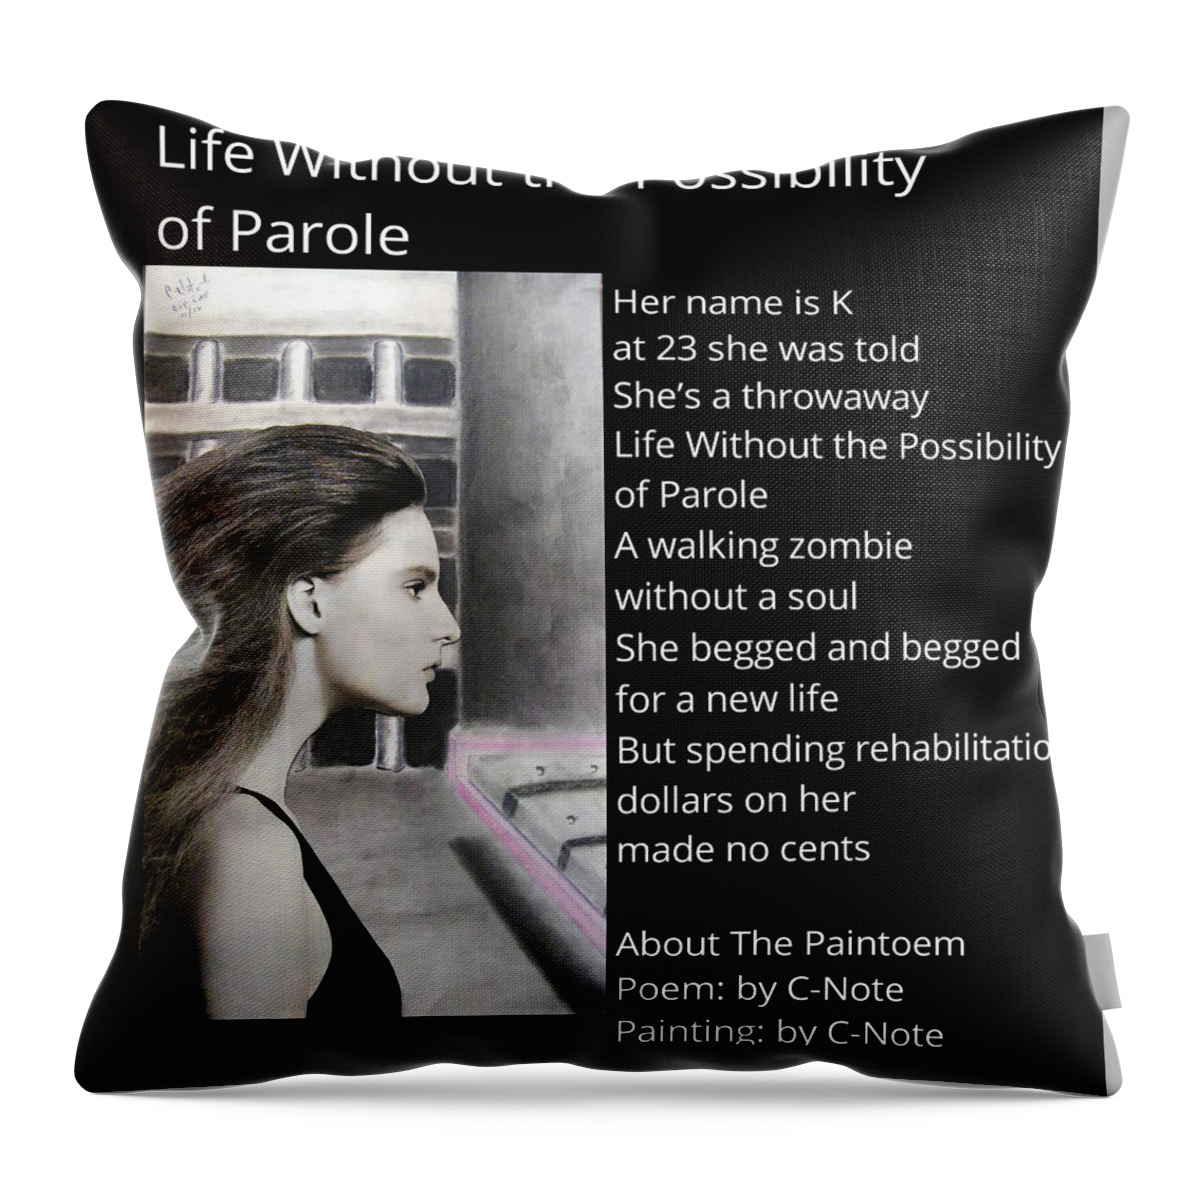 Black Art Throw Pillow featuring the digital art Life Without the Possibility of Parole Paintoem by Donald C-Note Hooker